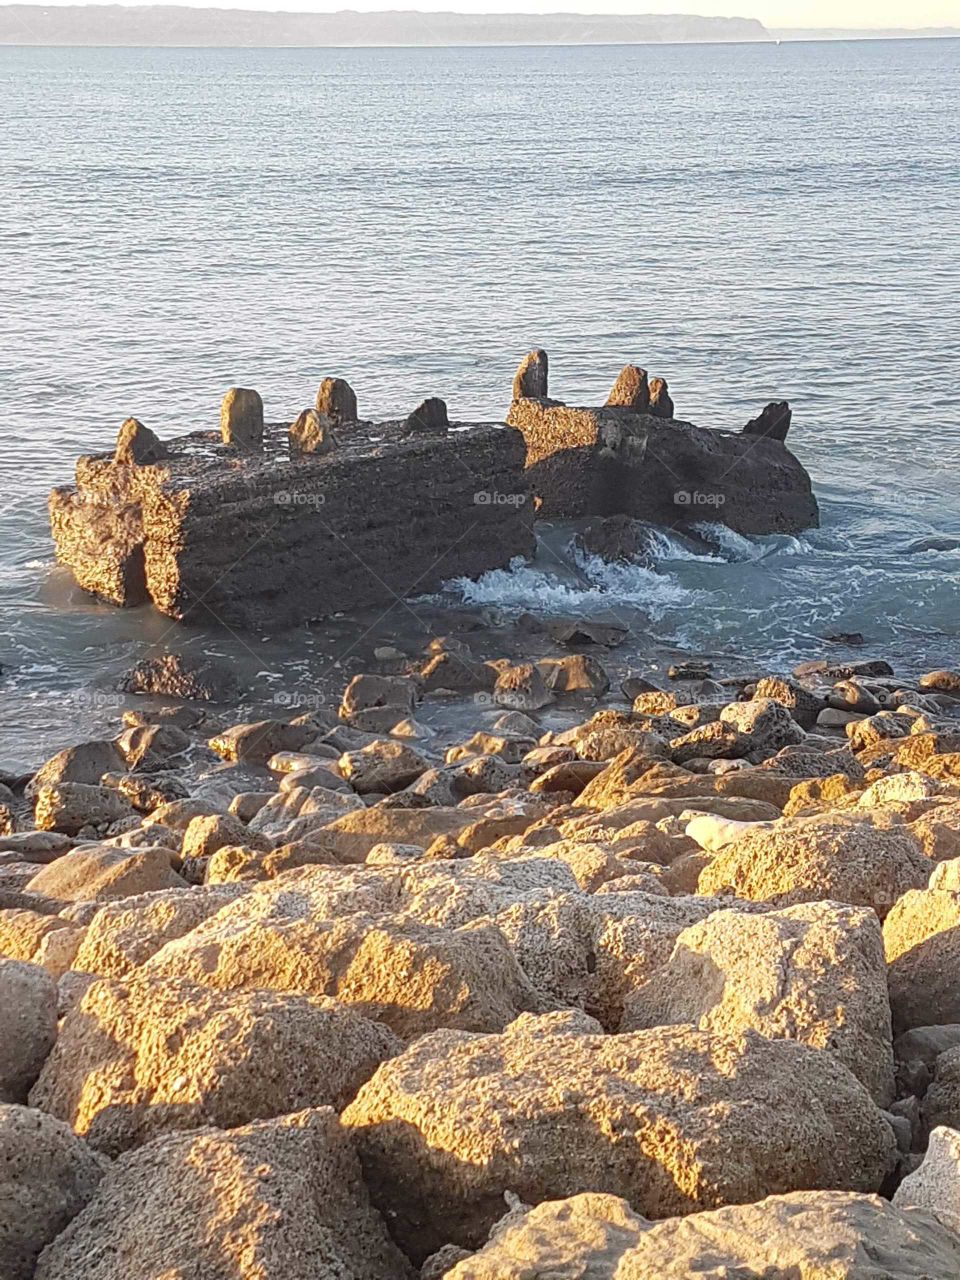 lime stone rock beach front. Remains of an old structure slowly being reduced by the sea.